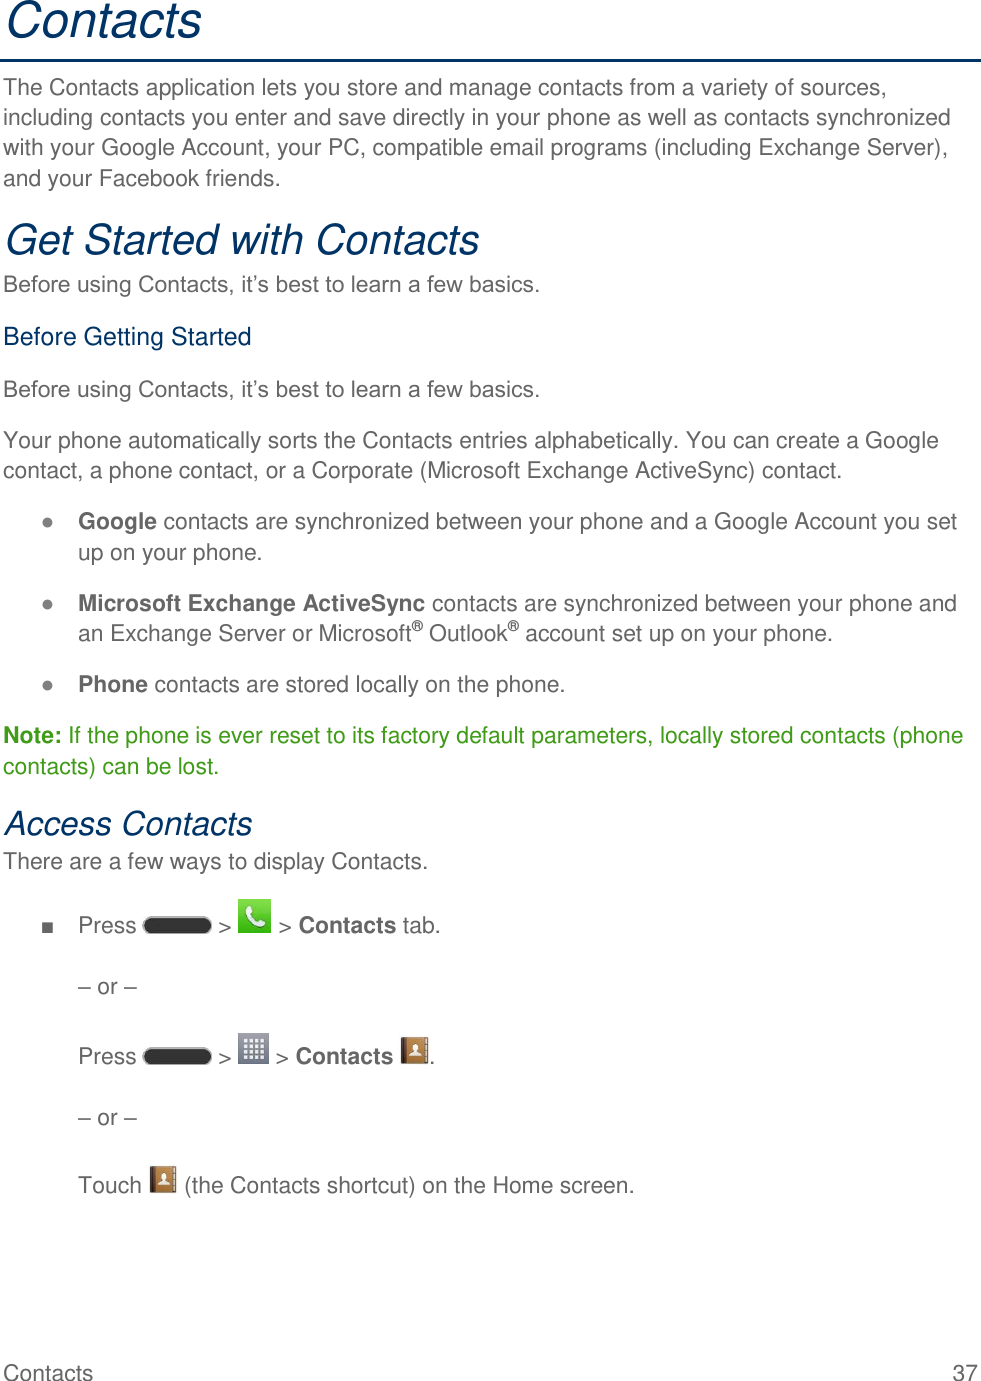 Contacts  37 Contacts The Contacts application lets you store and manage contacts from a variety of sources, including contacts you enter and save directly in your phone as well as contacts synchronized with your Google Account, your PC, compatible email programs (including Exchange Server), and your Facebook friends. Get Started with Contacts Before using Contacts, it‘s best to learn a few basics. Before Getting Started Before using Contacts, it‘s best to learn a few basics. Your phone automatically sorts the Contacts entries alphabetically. You can create a Google contact, a phone contact, or a Corporate (Microsoft Exchange ActiveSync) contact. ● Google contacts are synchronized between your phone and a Google Account you set up on your phone. ● Microsoft Exchange ActiveSync contacts are synchronized between your phone and an Exchange Server or Microsoft® Outlook® account set up on your phone. ● Phone contacts are stored locally on the phone. Note: If the phone is ever reset to its factory default parameters, locally stored contacts (phone contacts) can be lost. Access Contacts There are a few ways to display Contacts. ■  Press   &gt;   &gt; Contacts tab.  – or –   Press   &gt;   &gt; Contacts  .  – or –  Touch   (the Contacts shortcut) on the Home screen. 